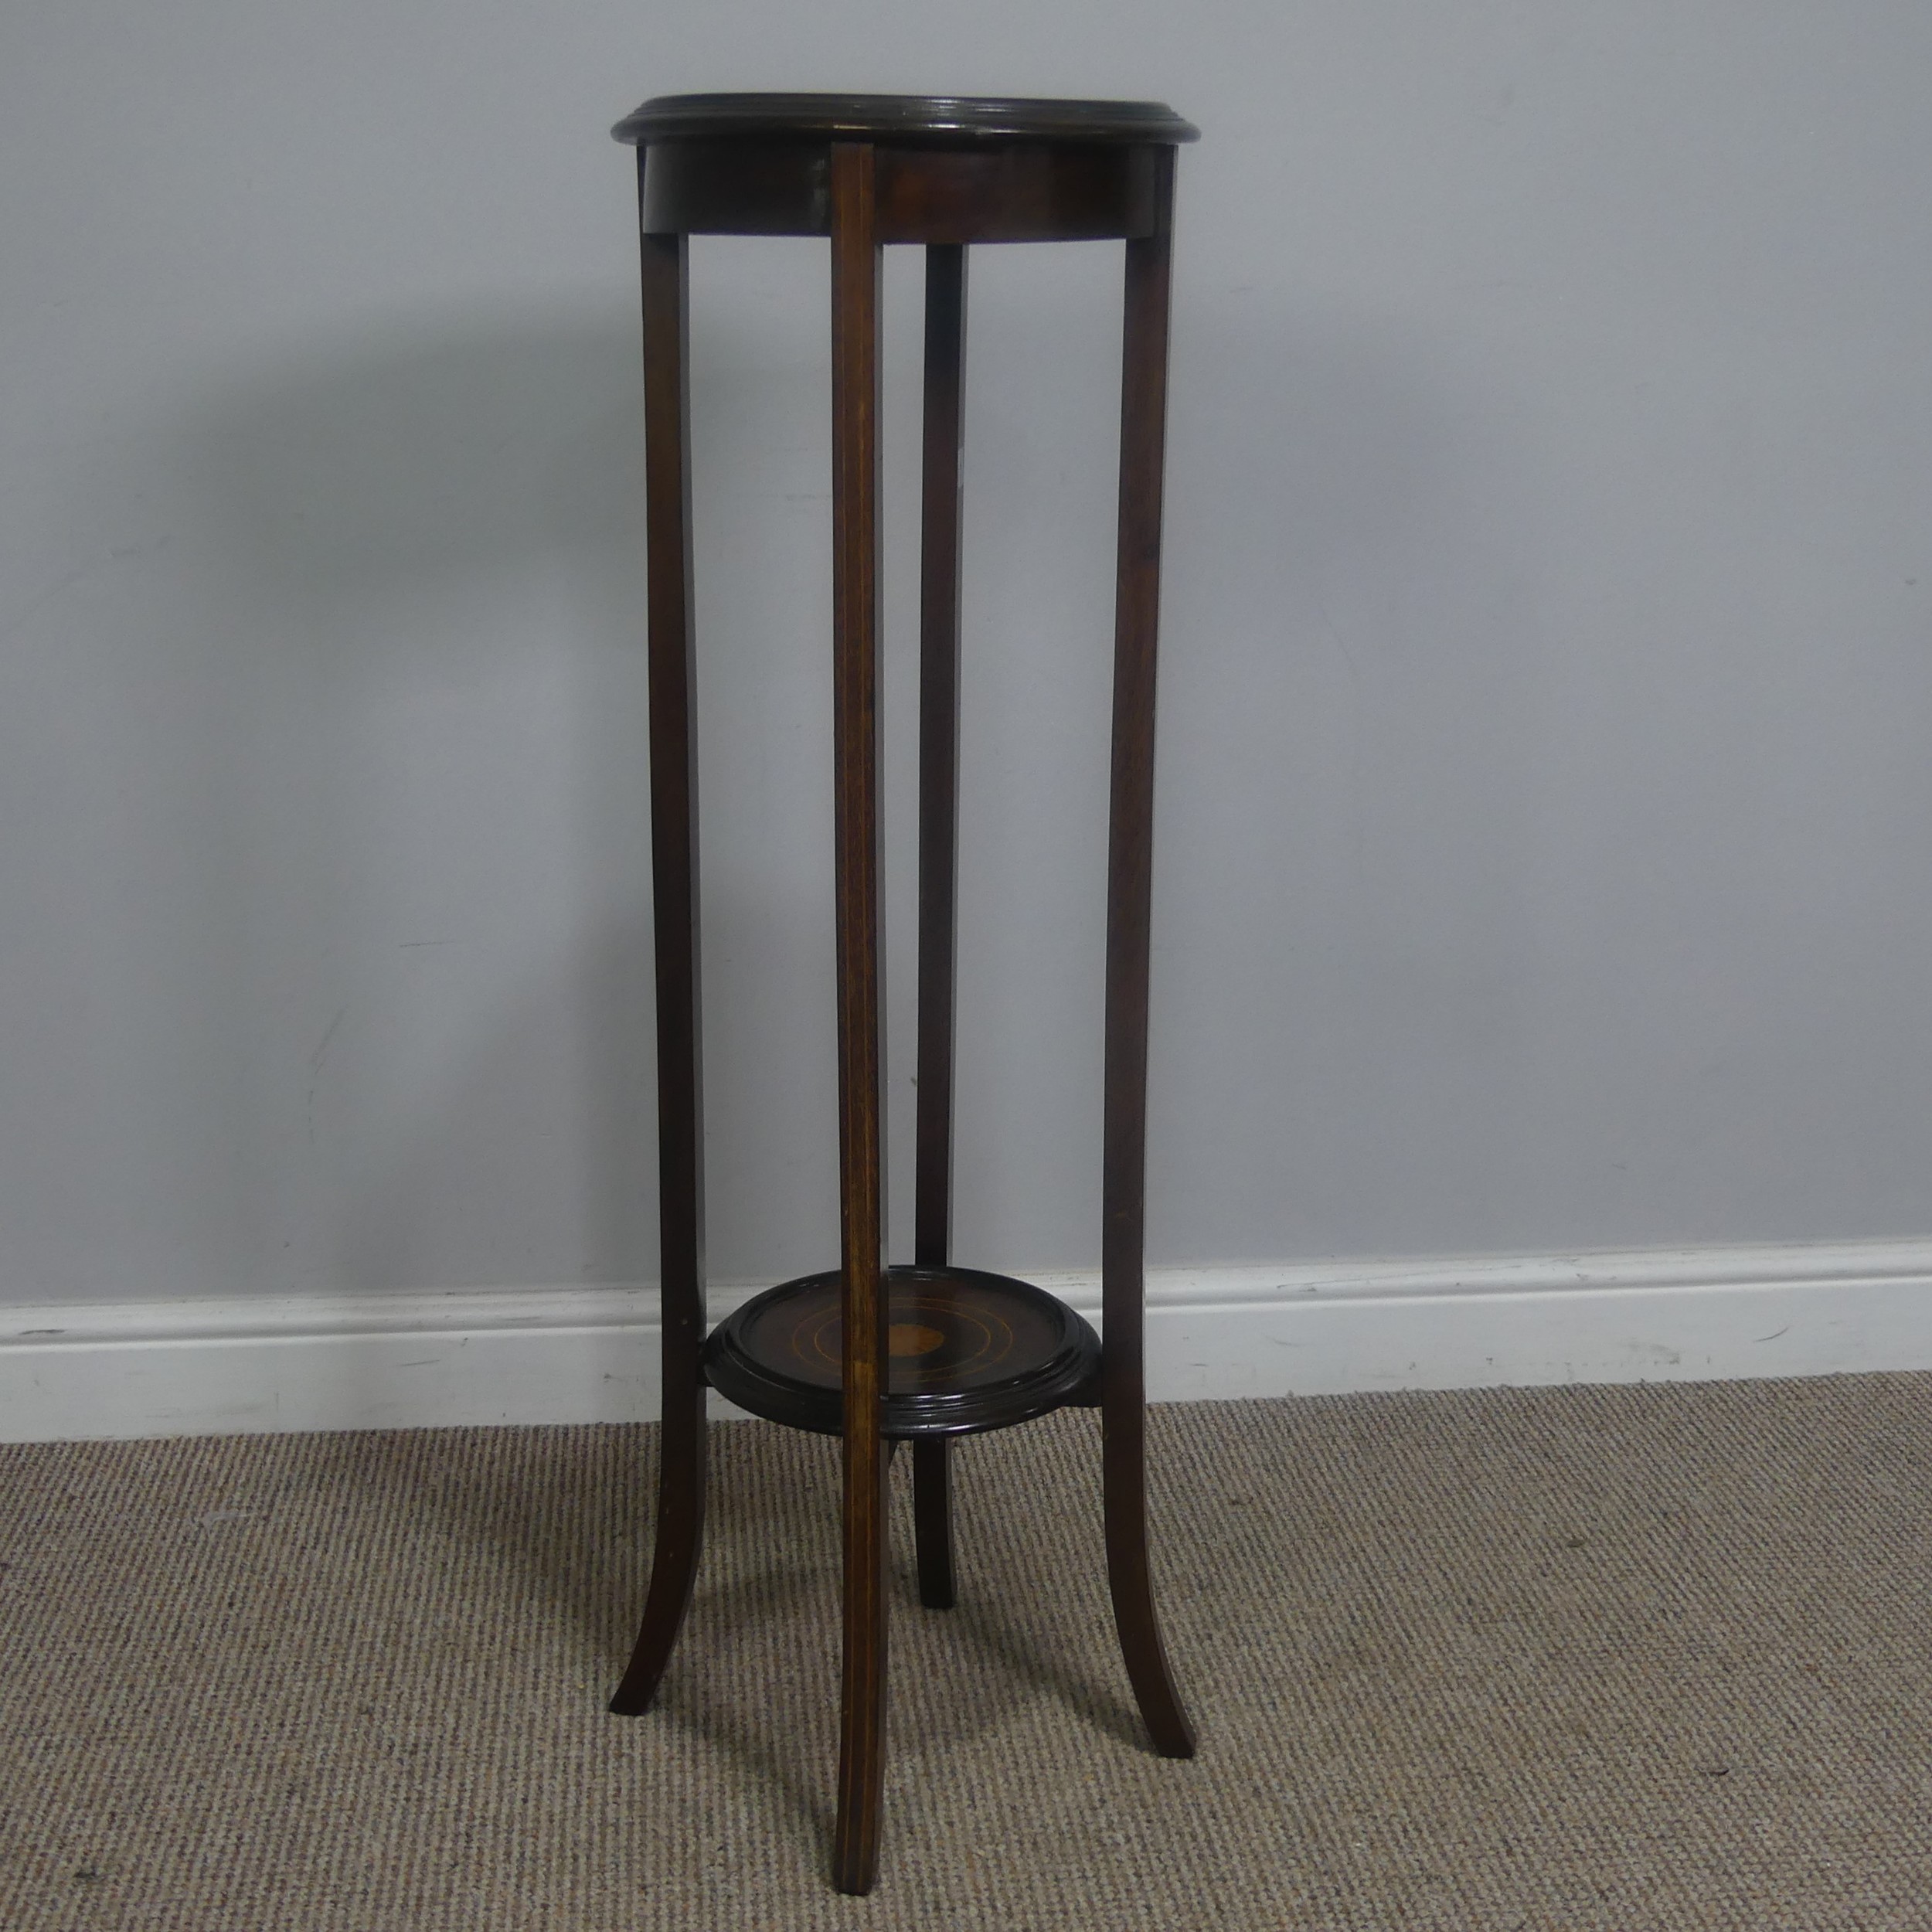 An Edwardian mahogany and inlaid Plant Stand, of circular form, H 99 cm, together with a woven